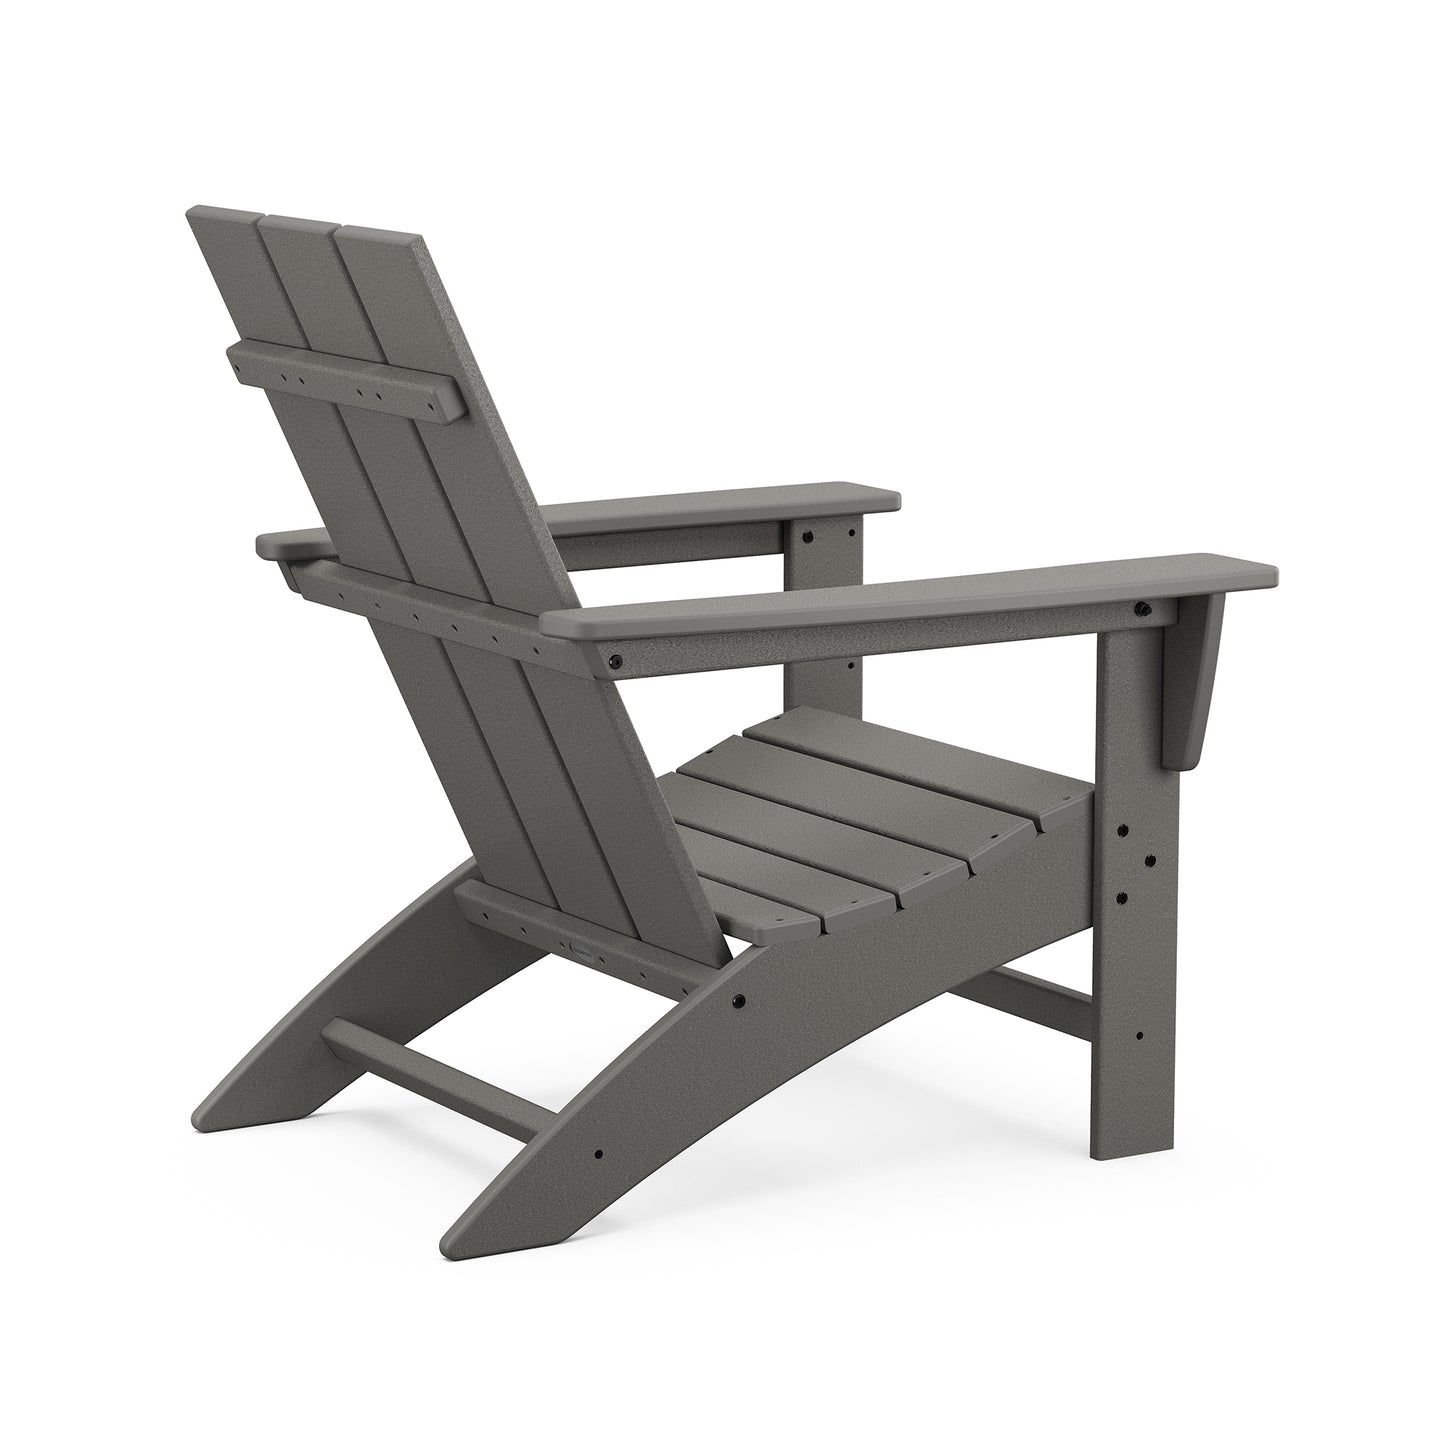 A modern gray POLYWOOD Modern Adirondack chair made of fade-resistant POLYWOOD® lumber, featuring a slanted back and wide armrests, displayed against a white background.